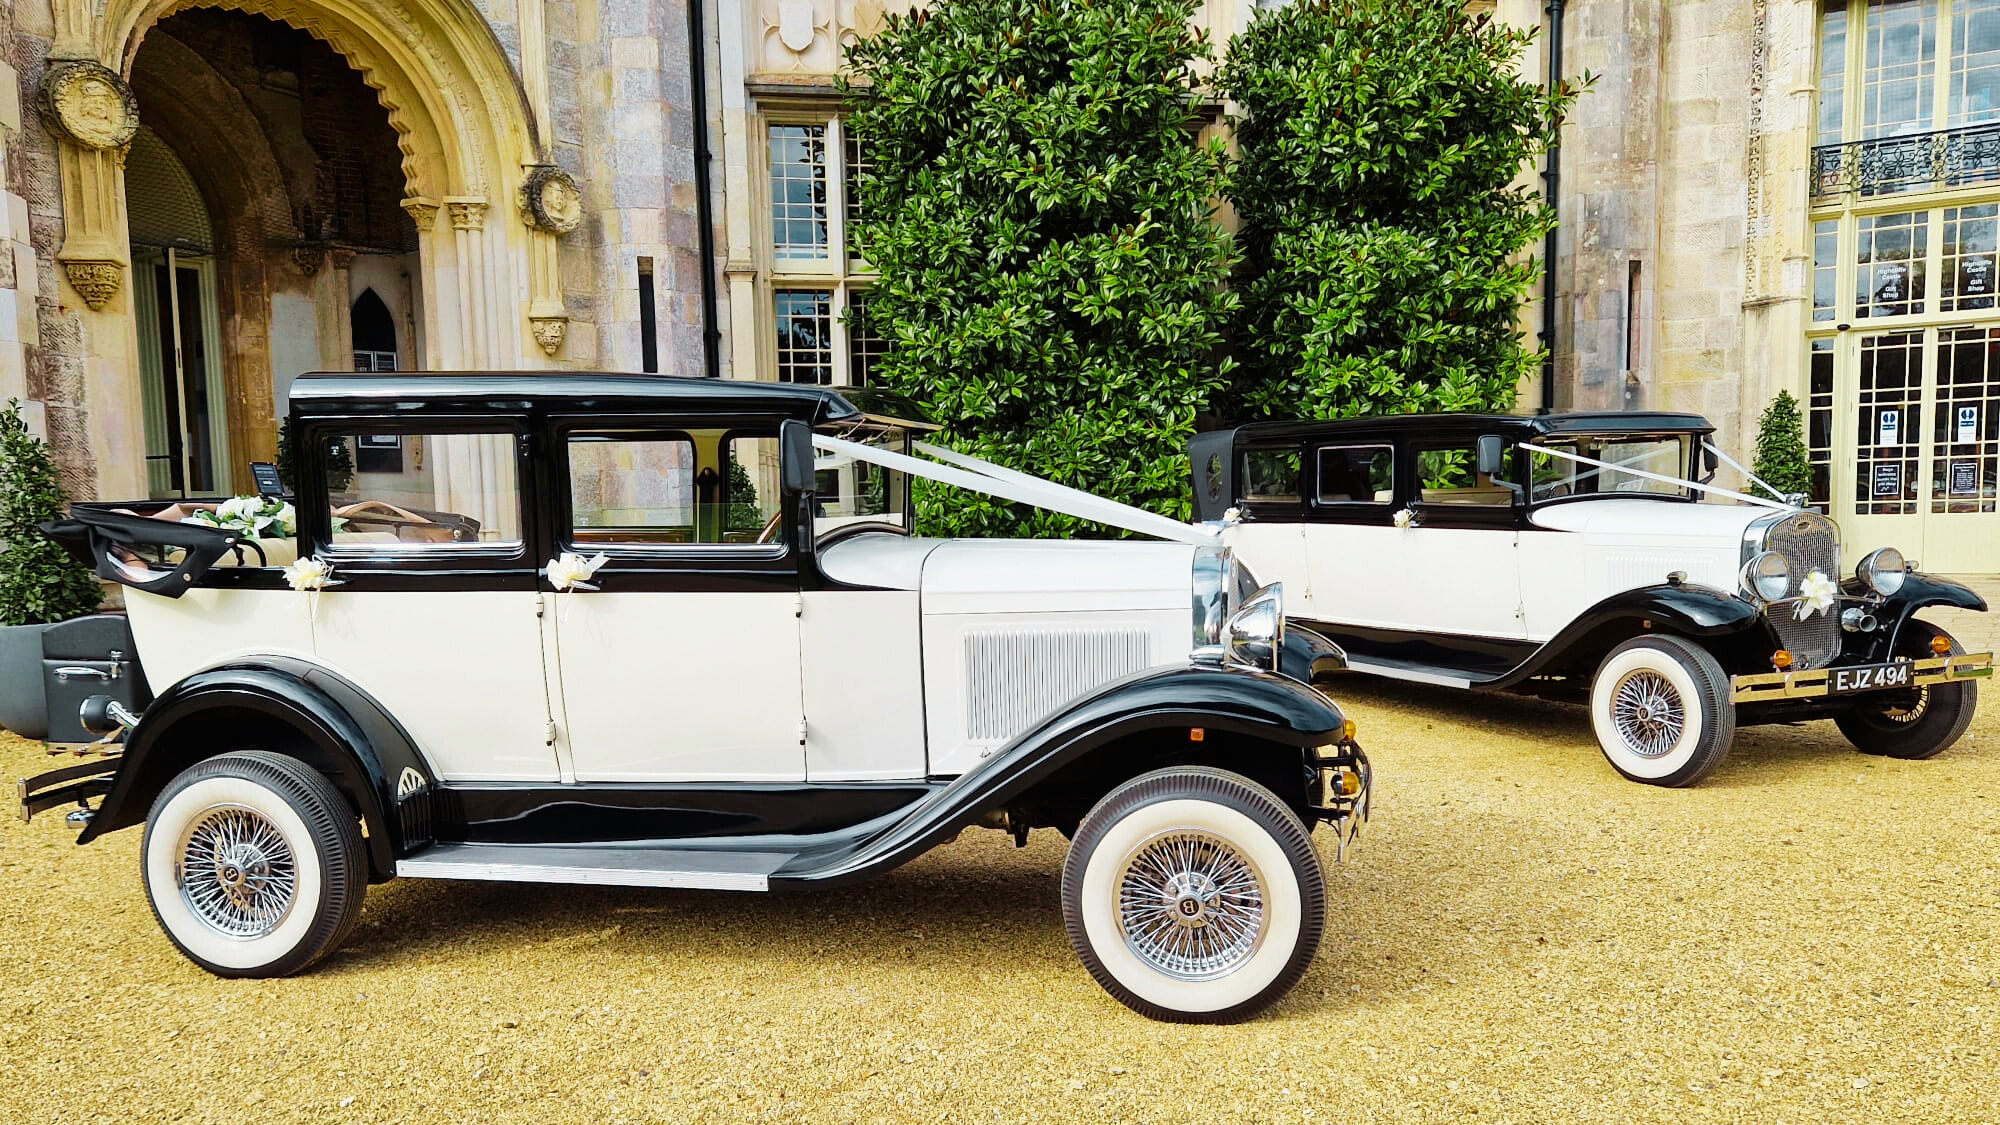 Two matching vintage wedding cars decorated with matching white ribbons. Vehicles are parked at the front entrance of a local wedding venue in Bere Regis.